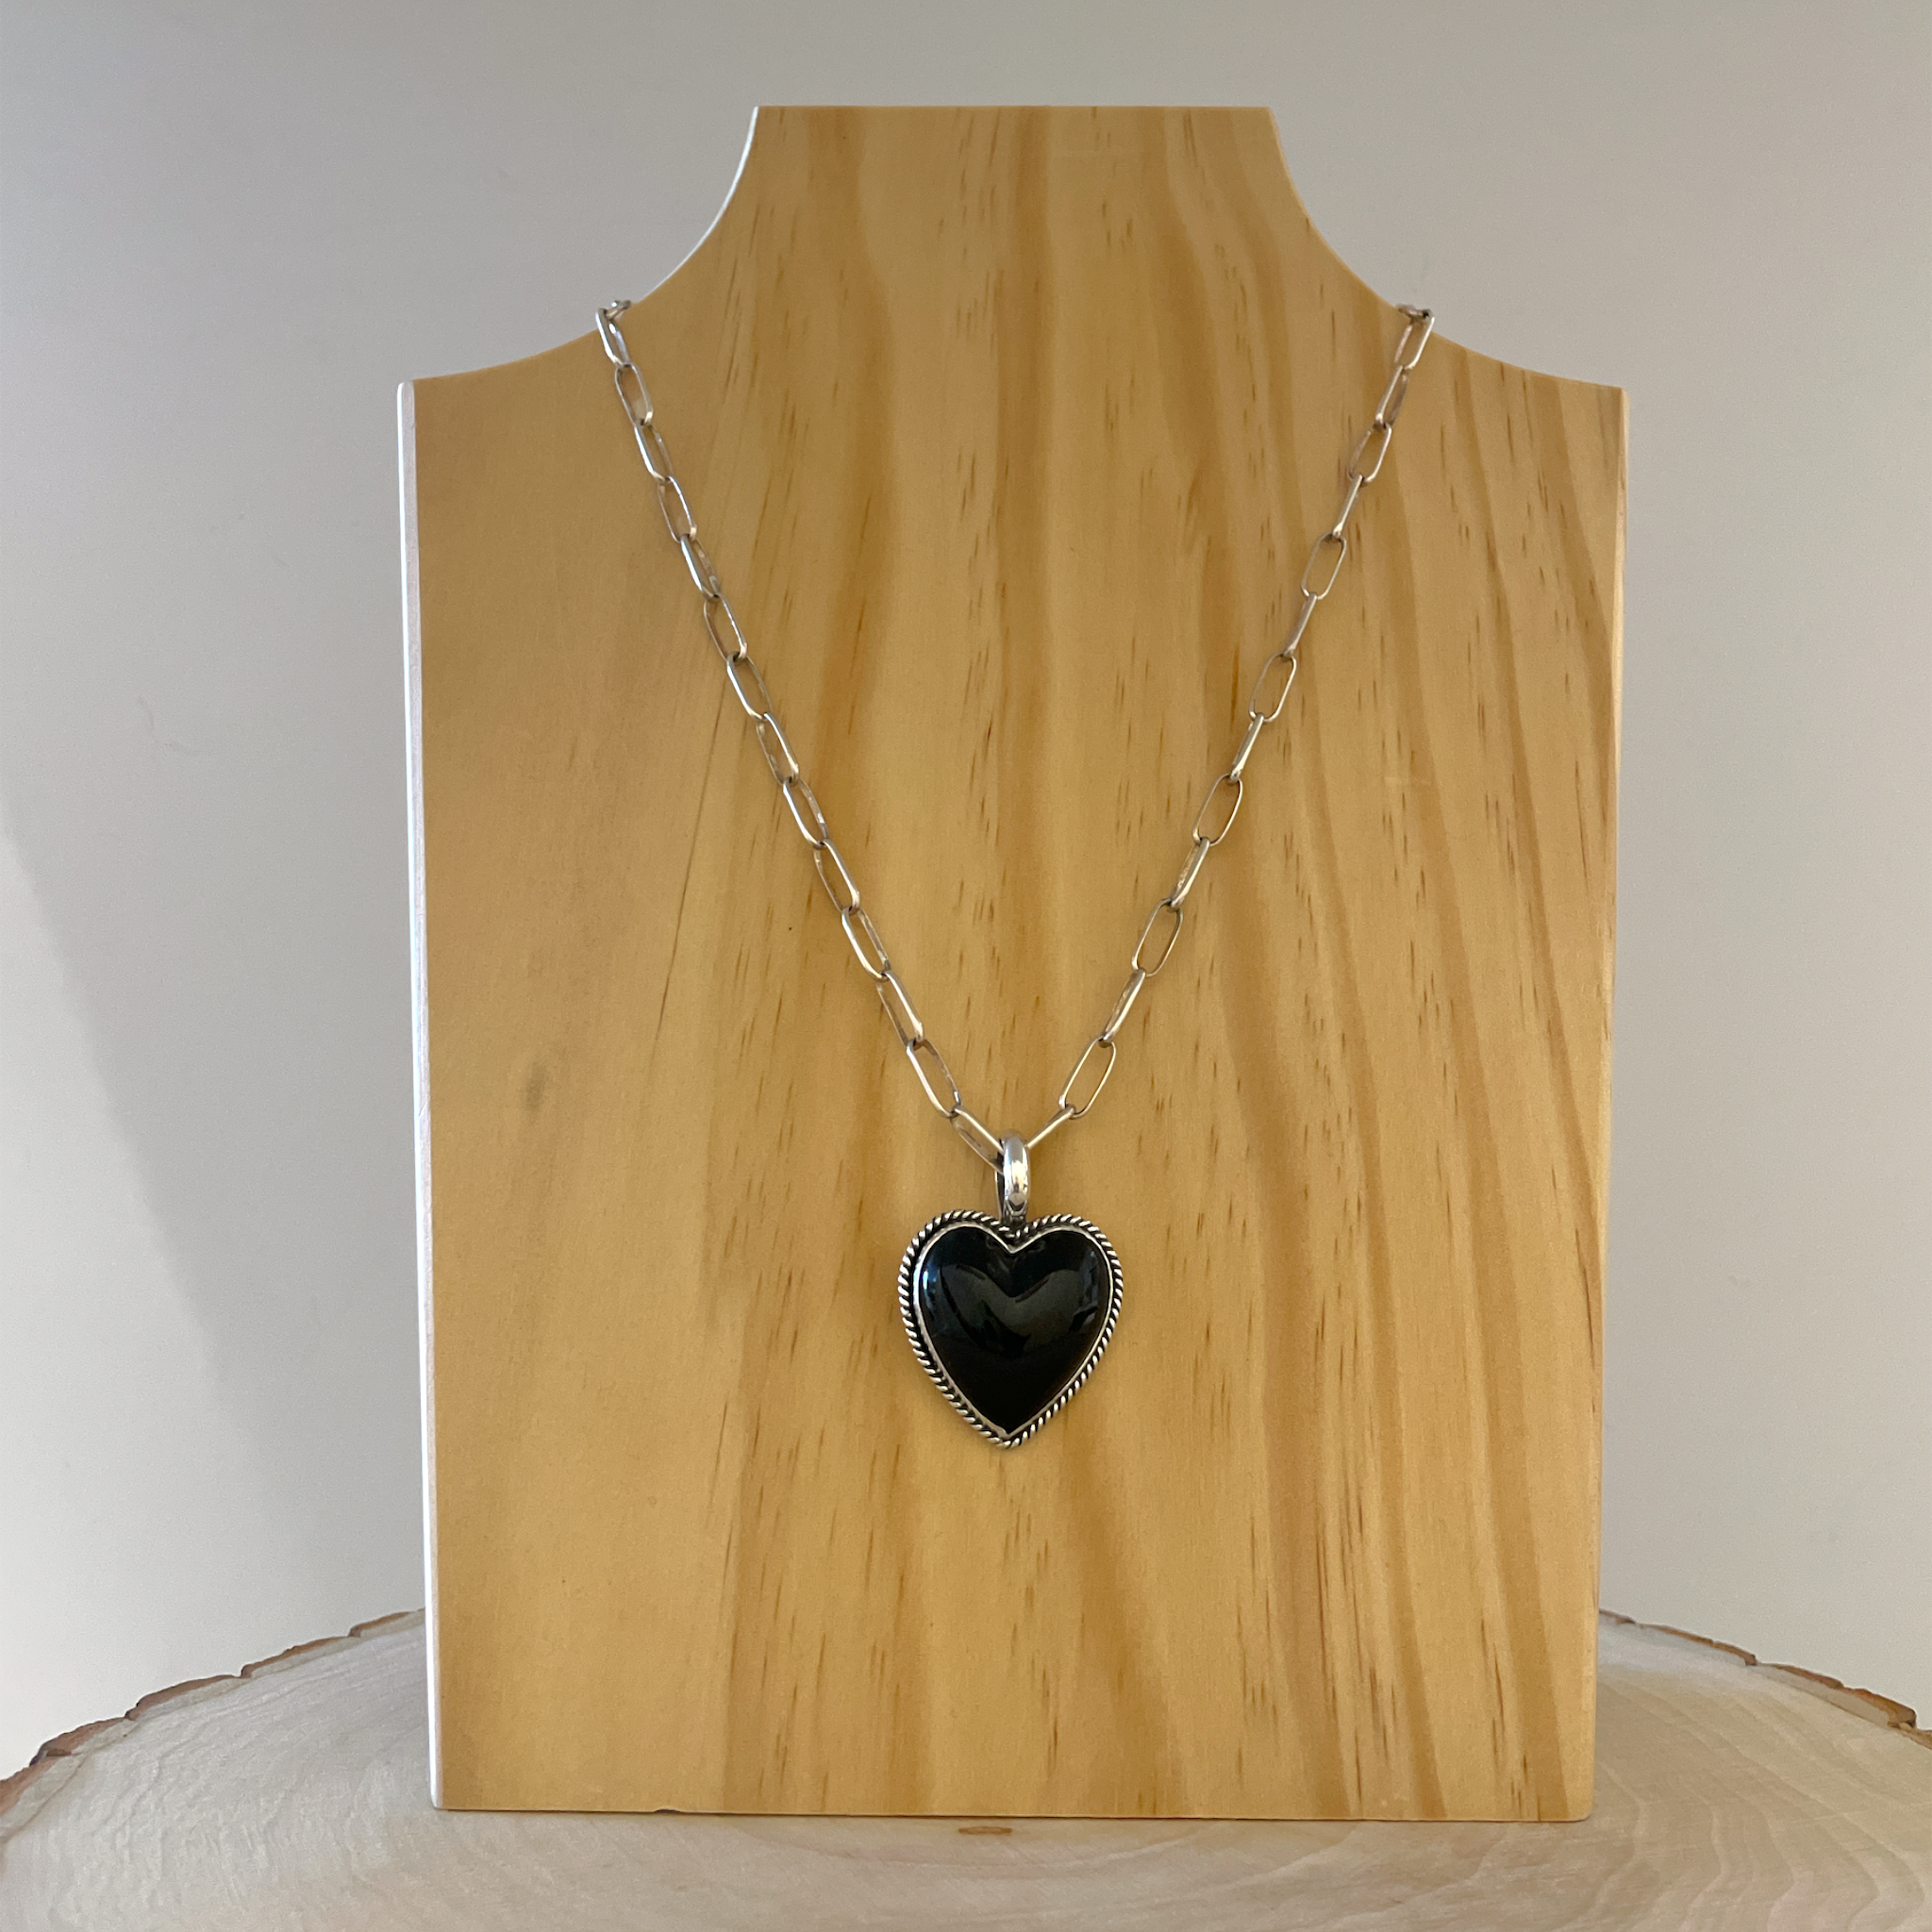 Amazon.com: Black Heart Necklace, Tiny and Dainty Sterling Silver Black  Onyx Heart Necklace for Women, Black Onyx Pendant Necklace, Layering  Necklace (black onyx heart necklace, 20 inches) : Handmade Products